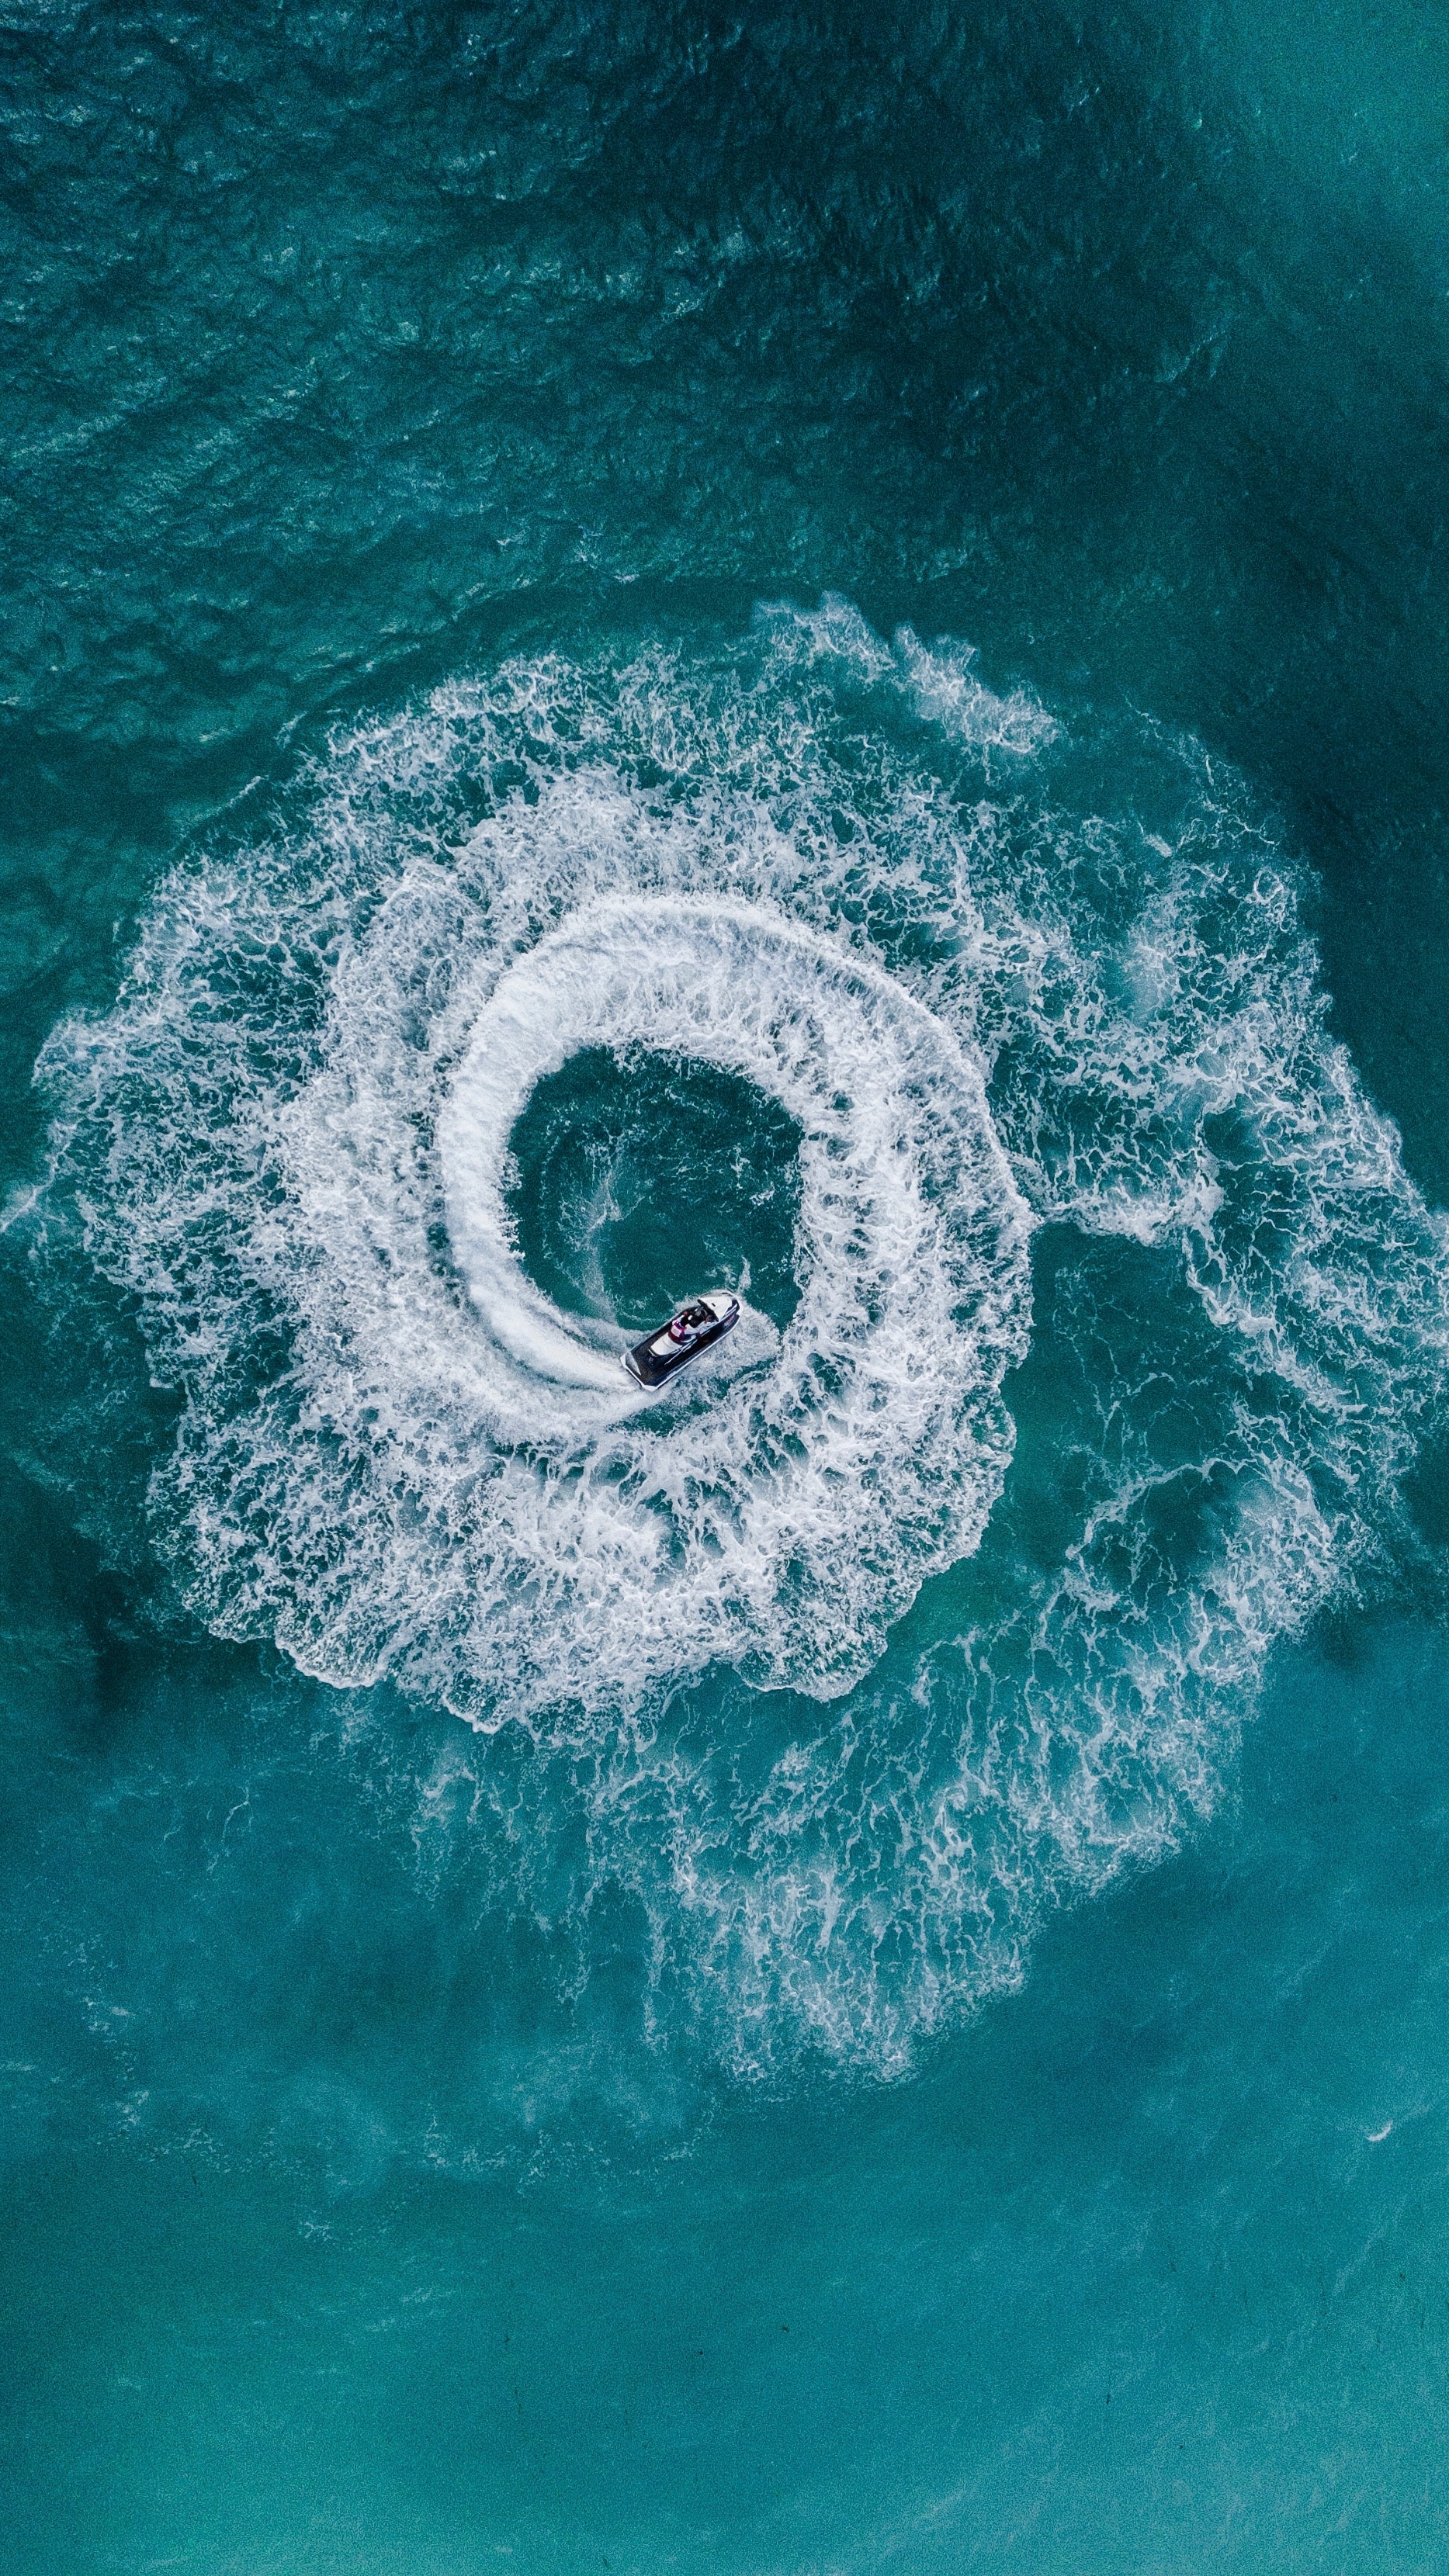 miscellaneous, sea, jet ski, water, waves, view from above, miscellanea, hydrocycle